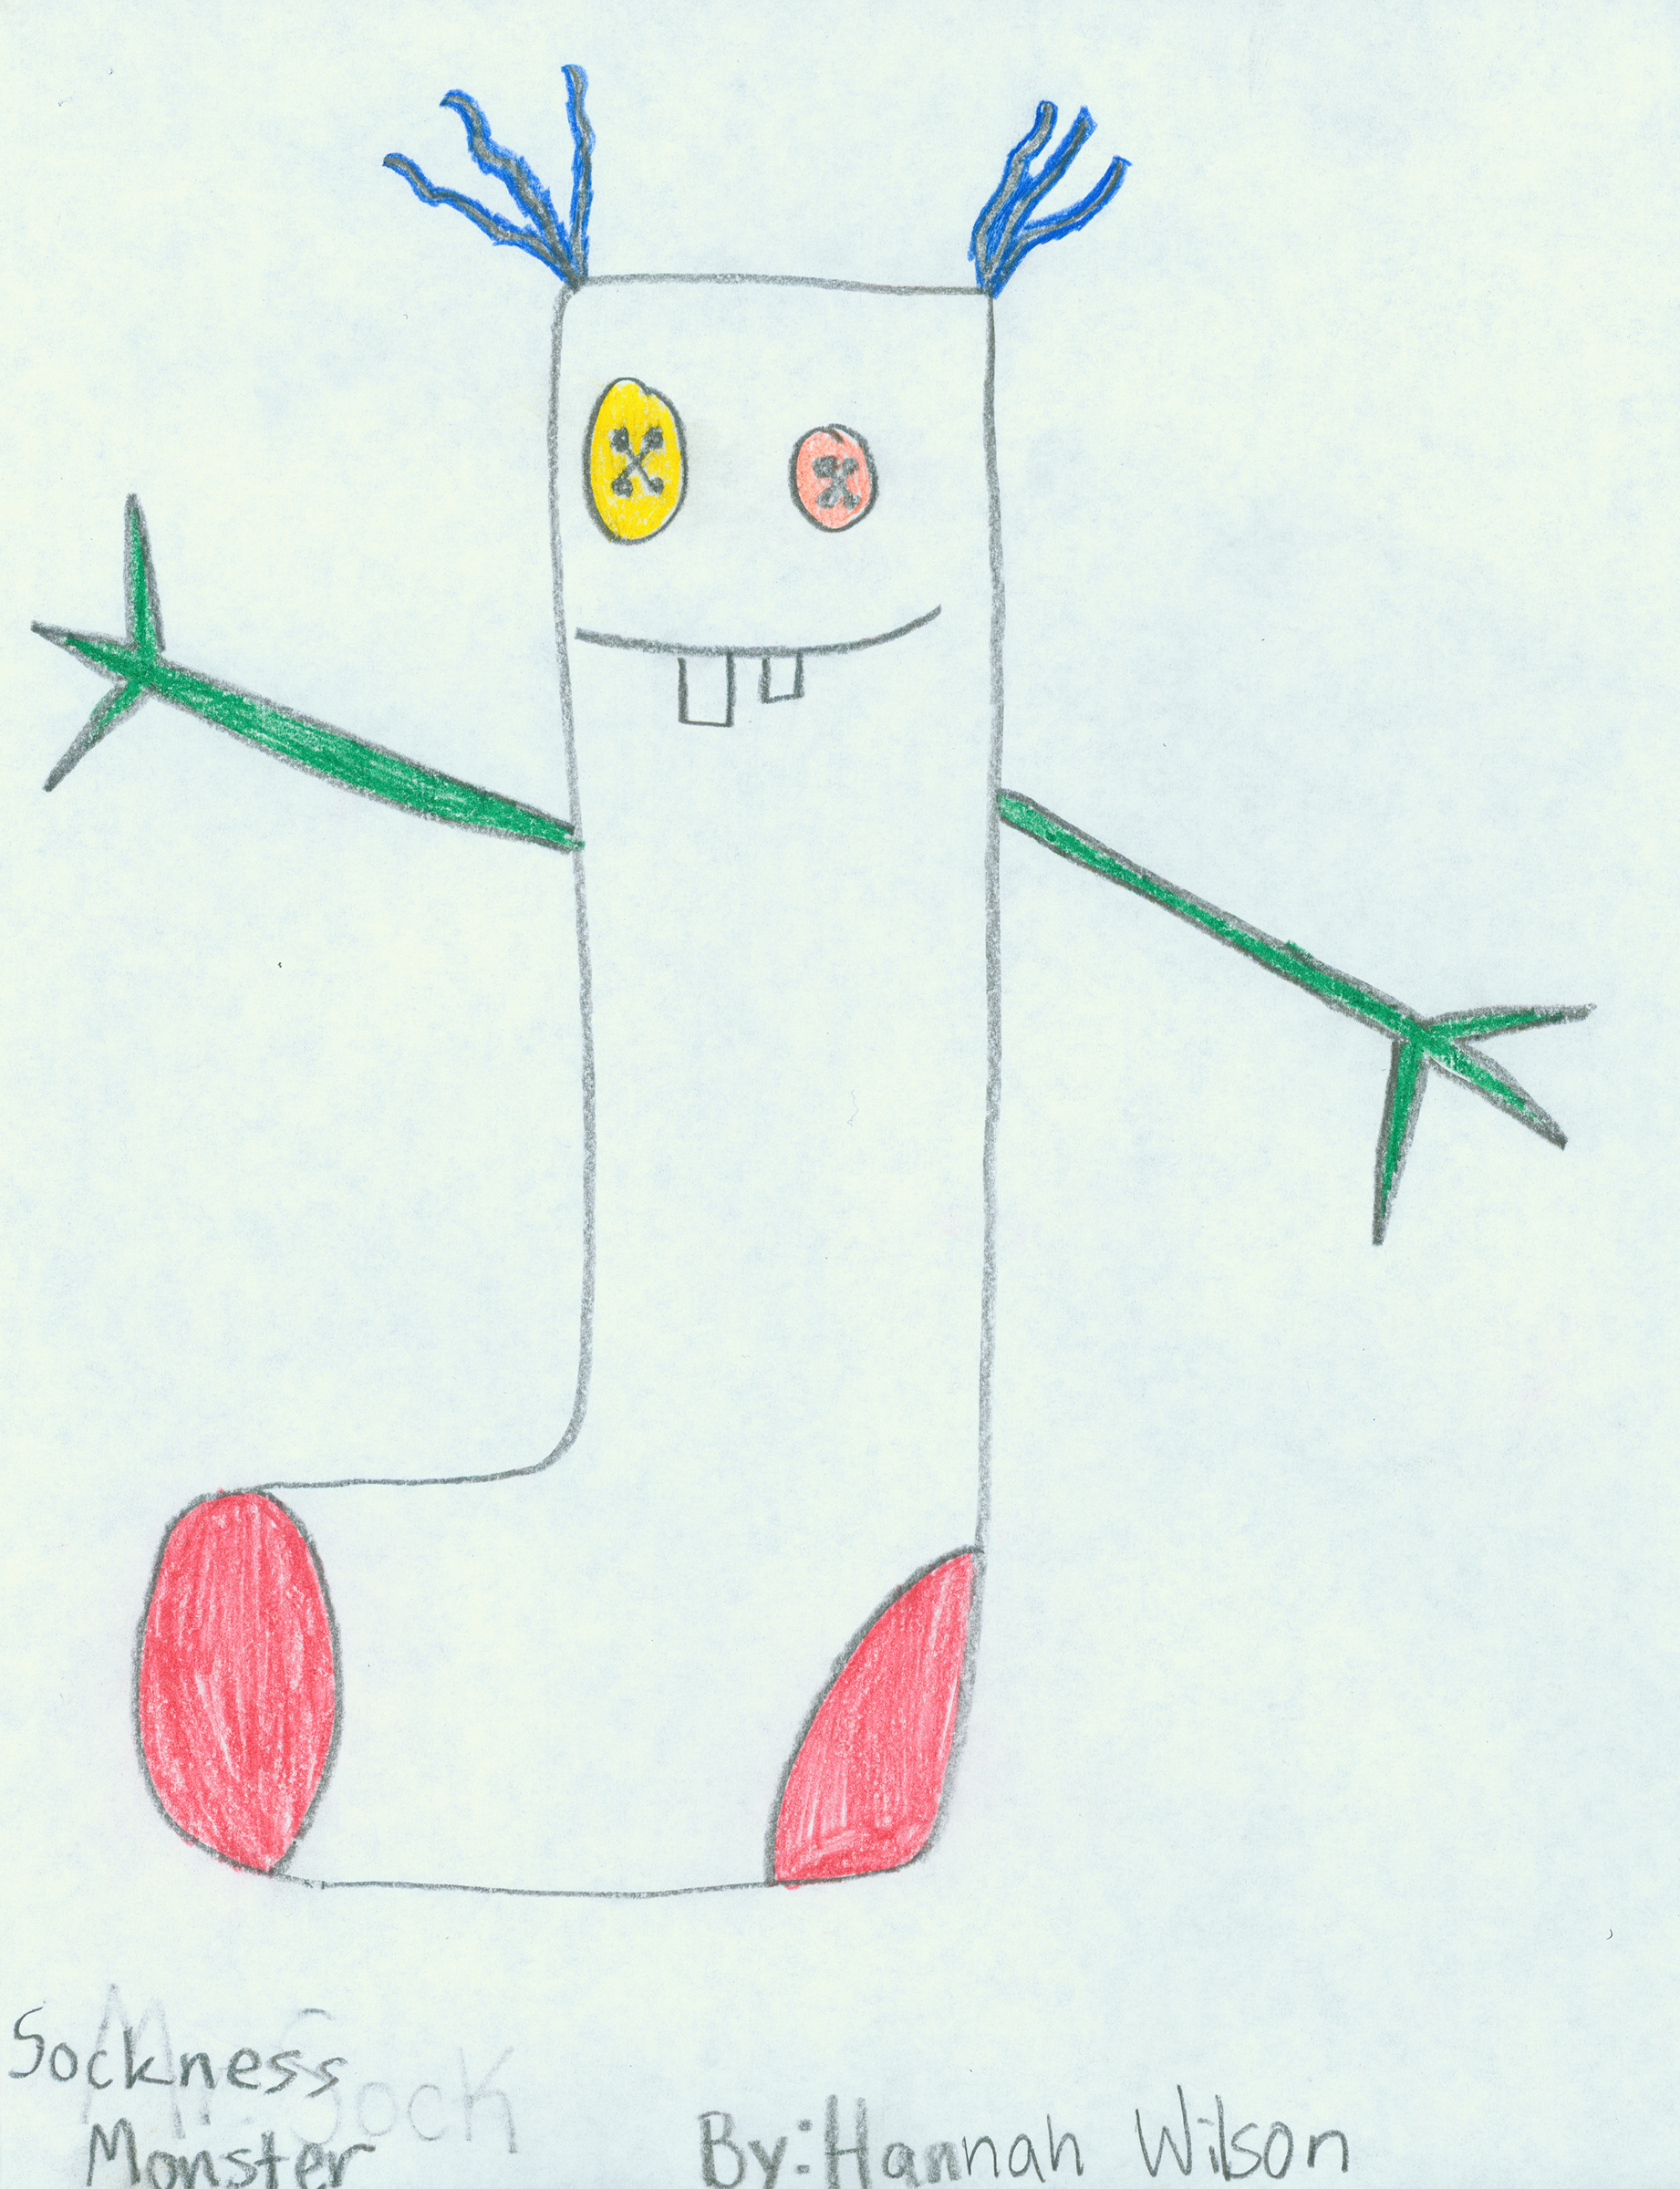  Hannah Wilson (age 11).&nbsp; Sockness Monster,  2009.&nbsp;Crayon on paper;&nbsp;11 x 8 1/2. Collection of Museum of Glass, Tacoma, Washington.&nbsp;   Sockness Monster  artist’s statement:  My sockness Monster eats all of the socks when they are i